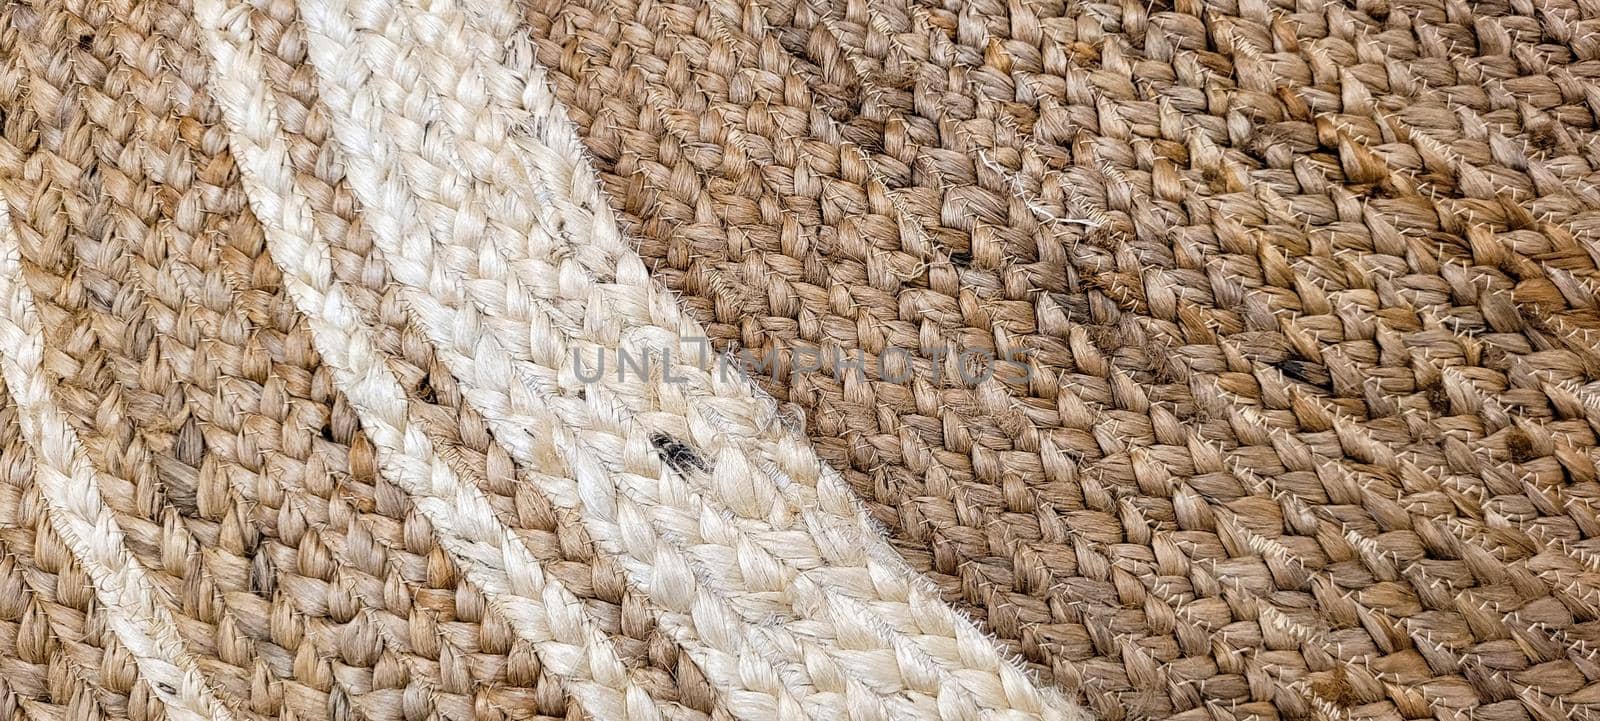 handmade straw rug with white details by sarsa